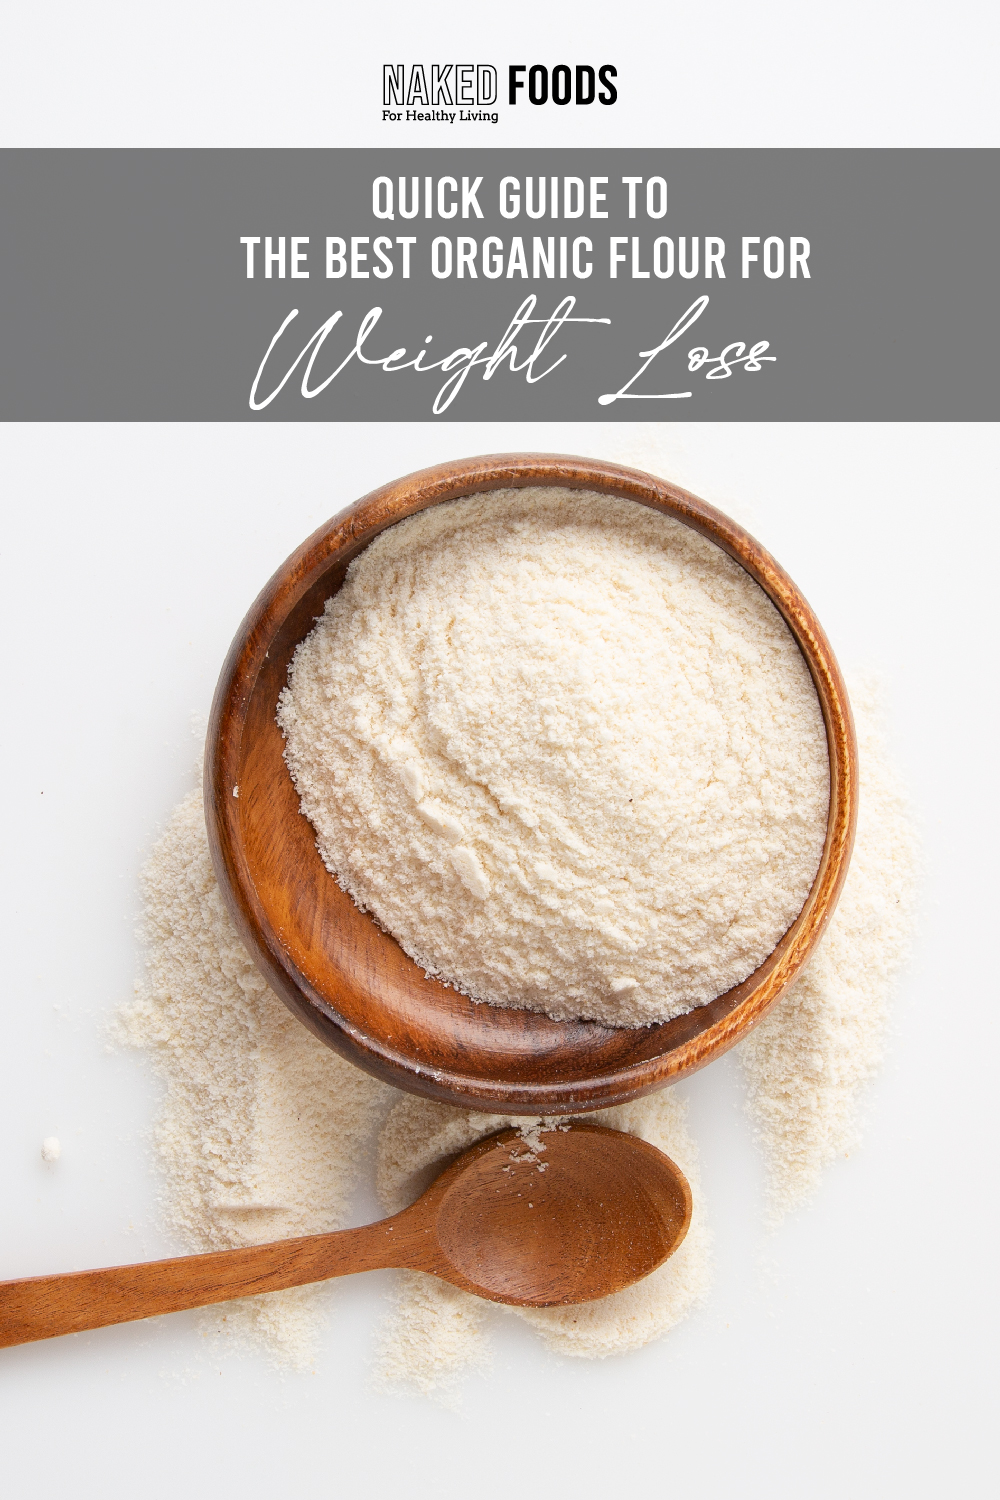 Quick Guide To The Best Organic Flours For Weight Loss